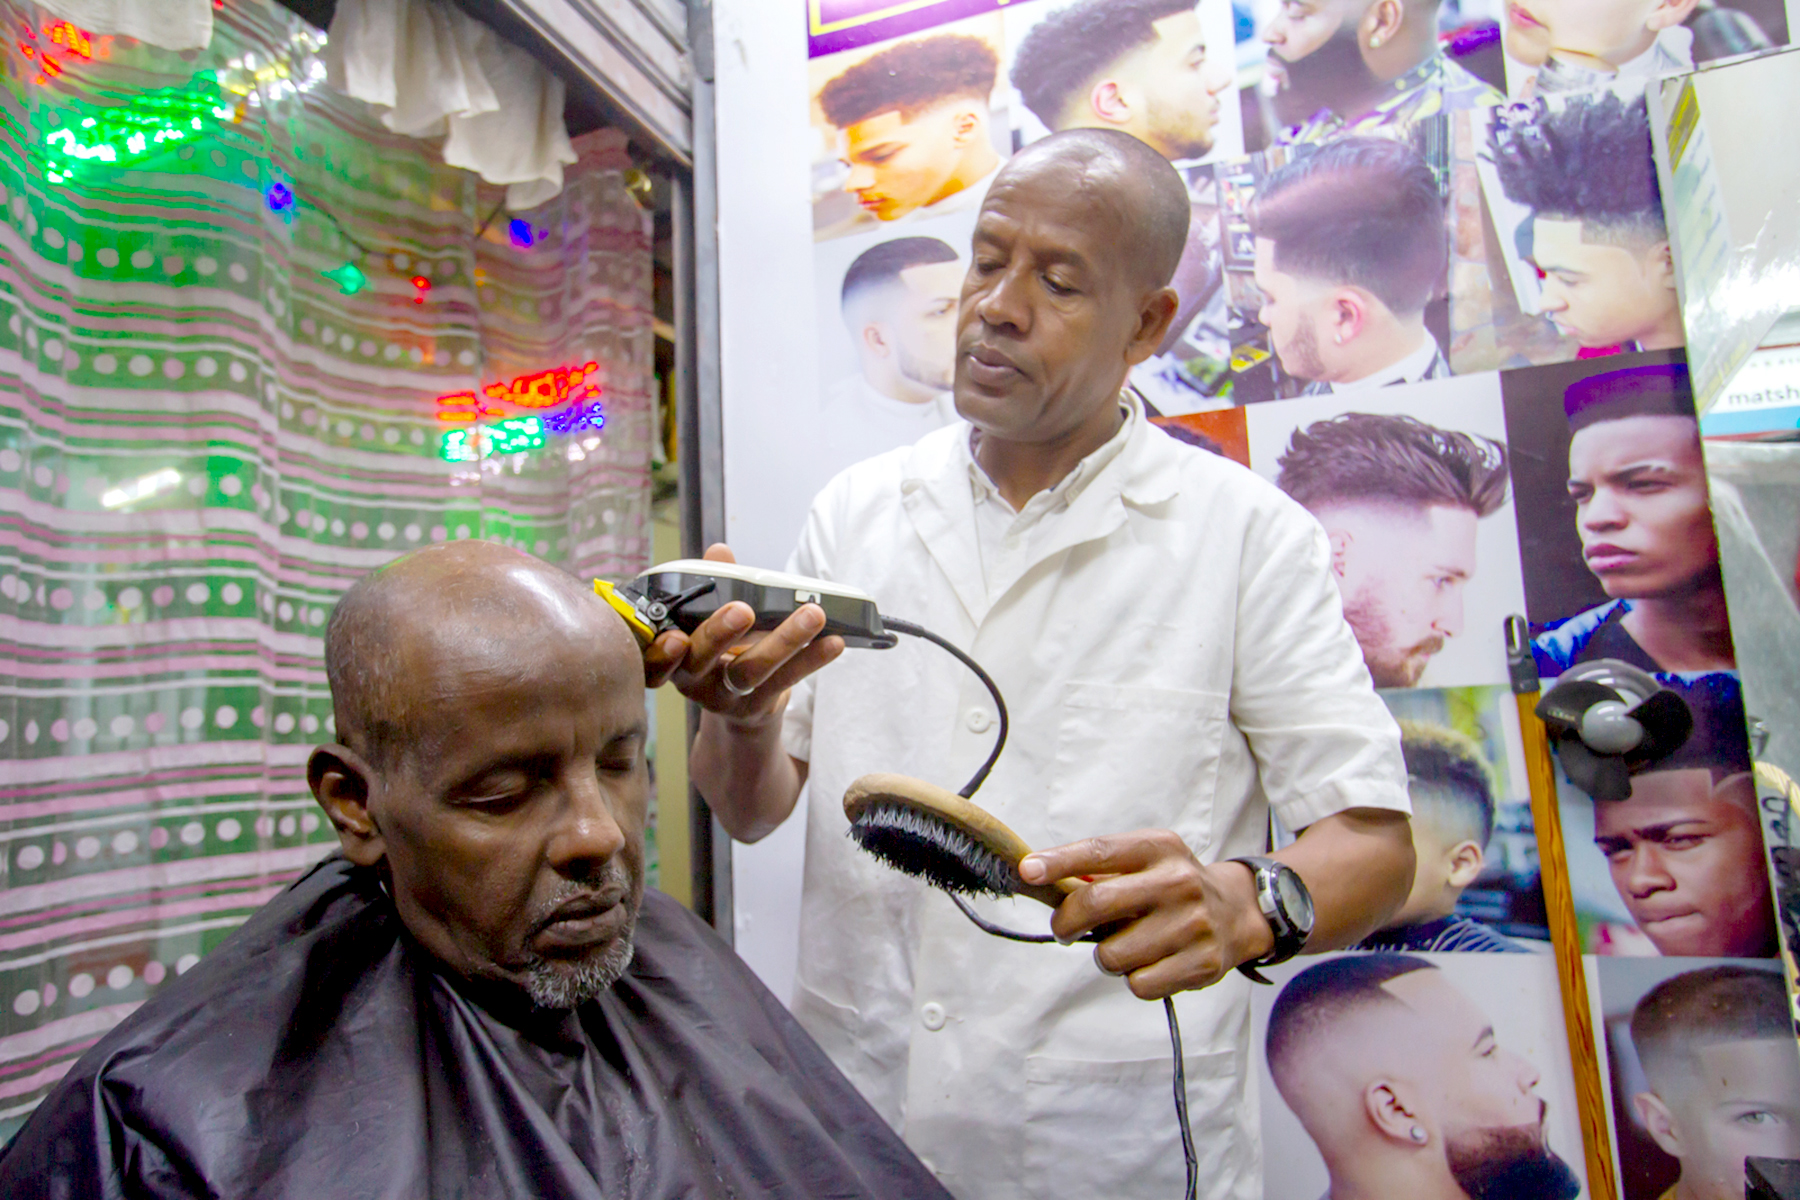 Matthewos Shifa, 47, a refugee from Ethiopia, uses the cash to open a barber shop. Here he gives a haircut to Abdi Shire, a businessman from Somalia staying at a hotel down the street in the popular immigrant neighborhood of Eastleigh.